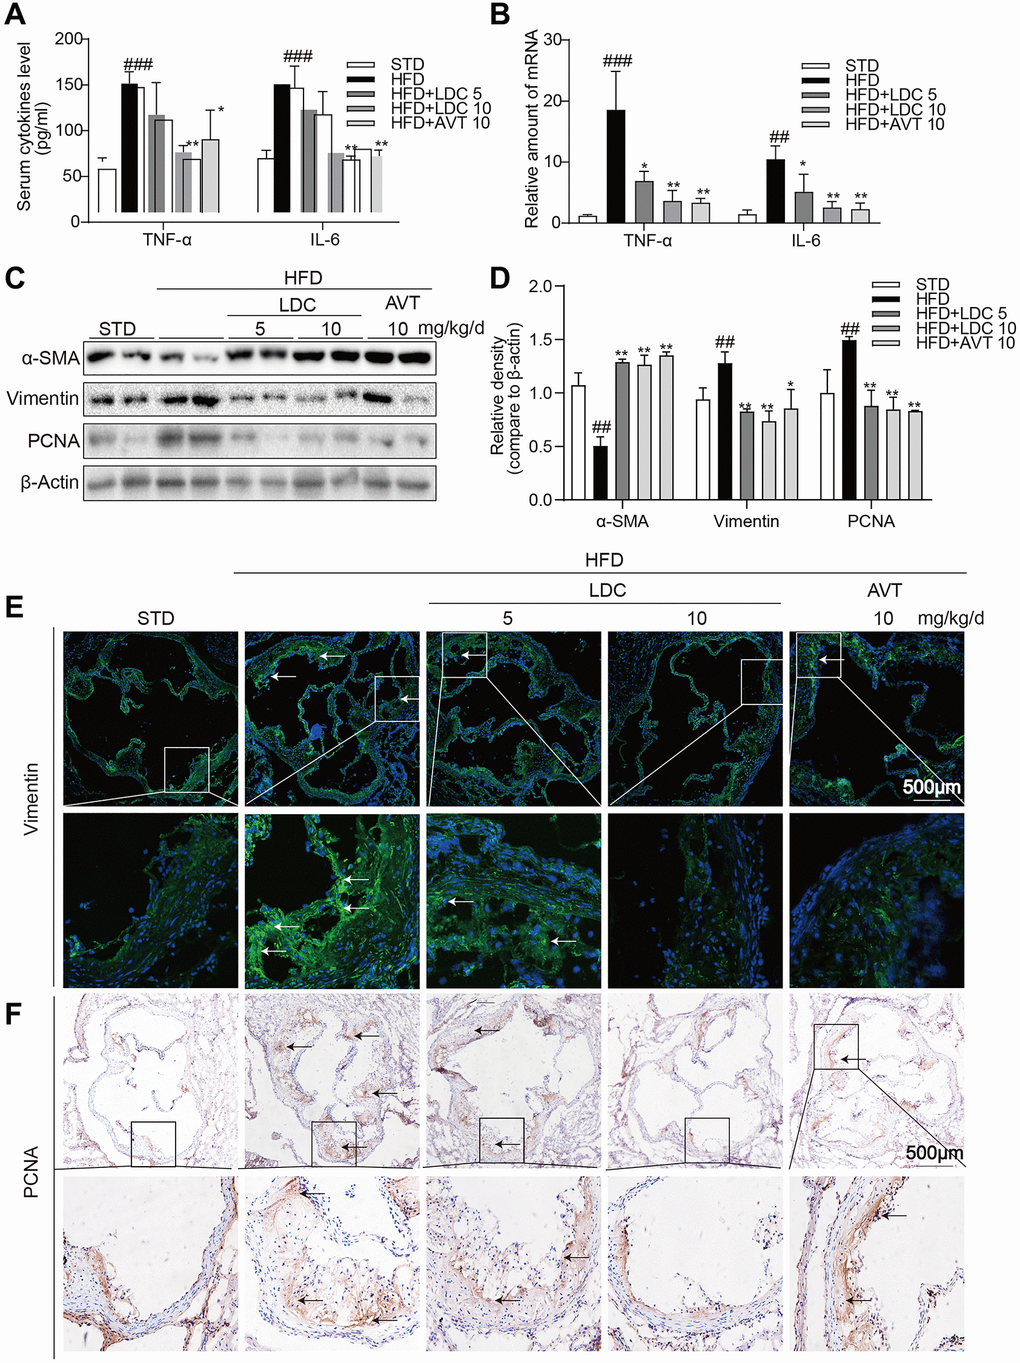 CDK9 inhibitor reduces HFD-induced inflammation phenotype switch of VSMCs in vivo. (A) TNF-α and IL-6 protein levels in the serum were detected using ELISA assay (n = 8; ###p *p **p B) TNF-α and IL-6 mRNA levels in the aorta were detected using real-time qPCR assay (n = 8; ##p ###p *p **p C–D) Western blot assay showed the expressions of α-SMA, Vimentin and PCNA in the whole aorta from ApoE-/- fed a normal (STD) or HFD for 16 weeks. Densitometric quantification for blots was shown in panel D (n = 8; ##p *p **p E) Representative immunofluorescence staining images for Vimentin (green) in aortic roots. Tissues were counterstained with DAPI (blue) (scale bar = 500 μm). (F) Representative images of PCNA staining of aortic roots (scale bar = 500 μm; DAB chromogen staining (brown)).